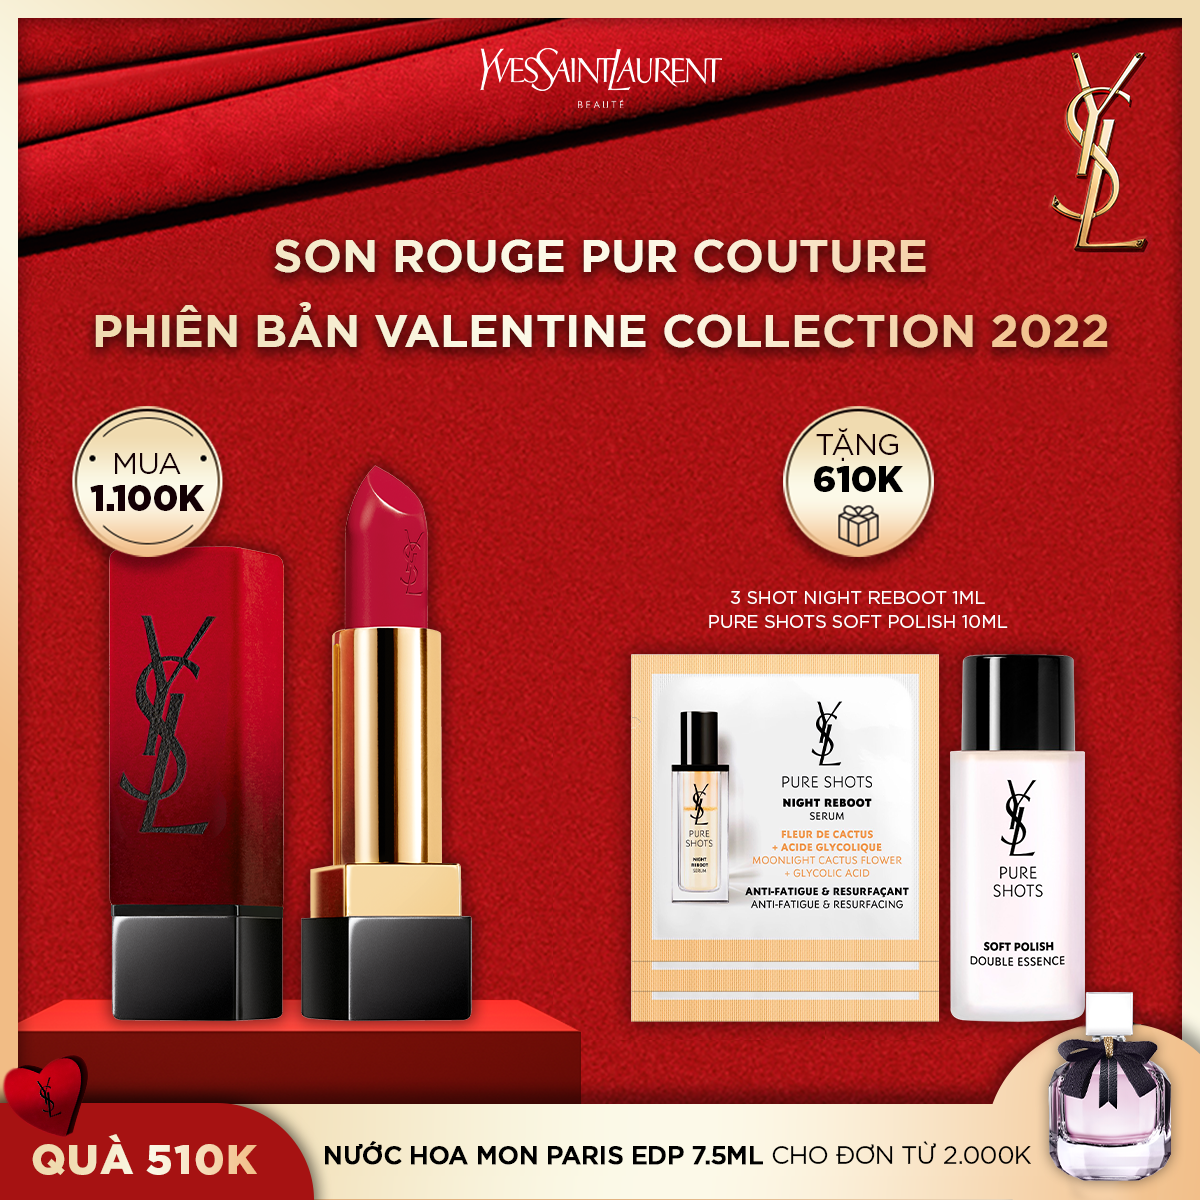 Son Rouge Pur Couture phiên bản Valentine Collection 2022